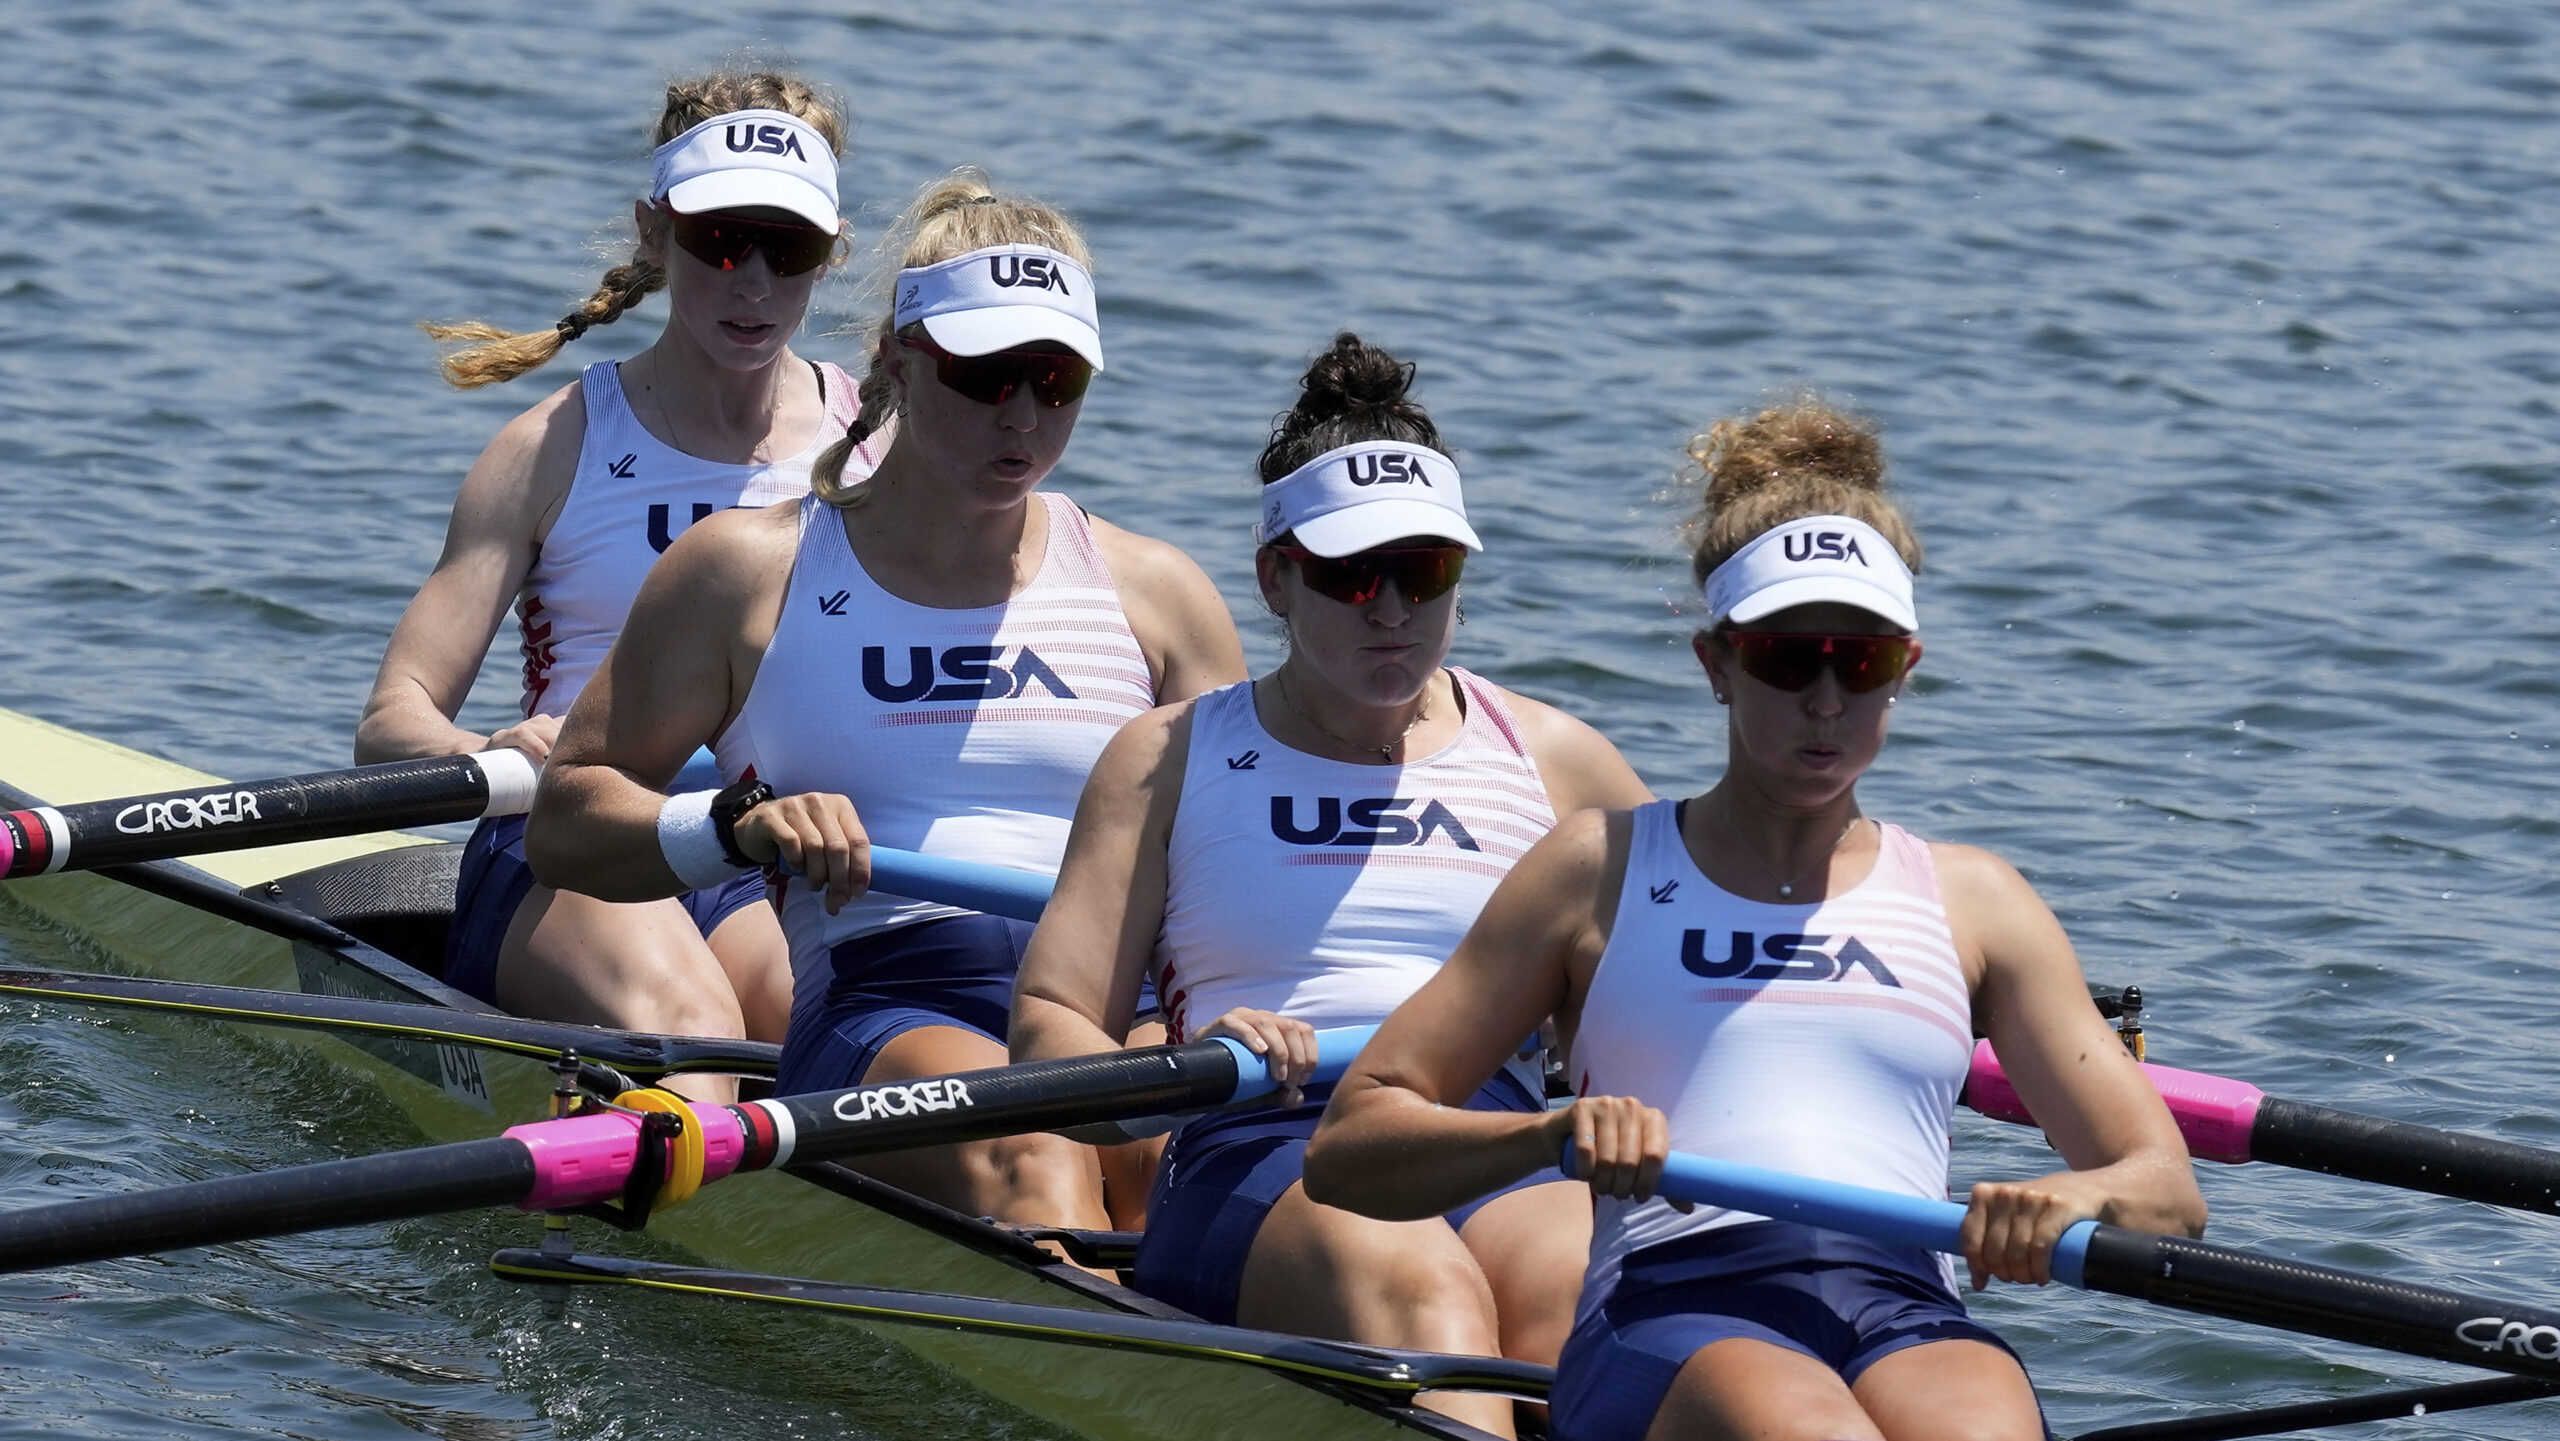 Pro baseball; Wisconsin rowing to be represented in the Olympics